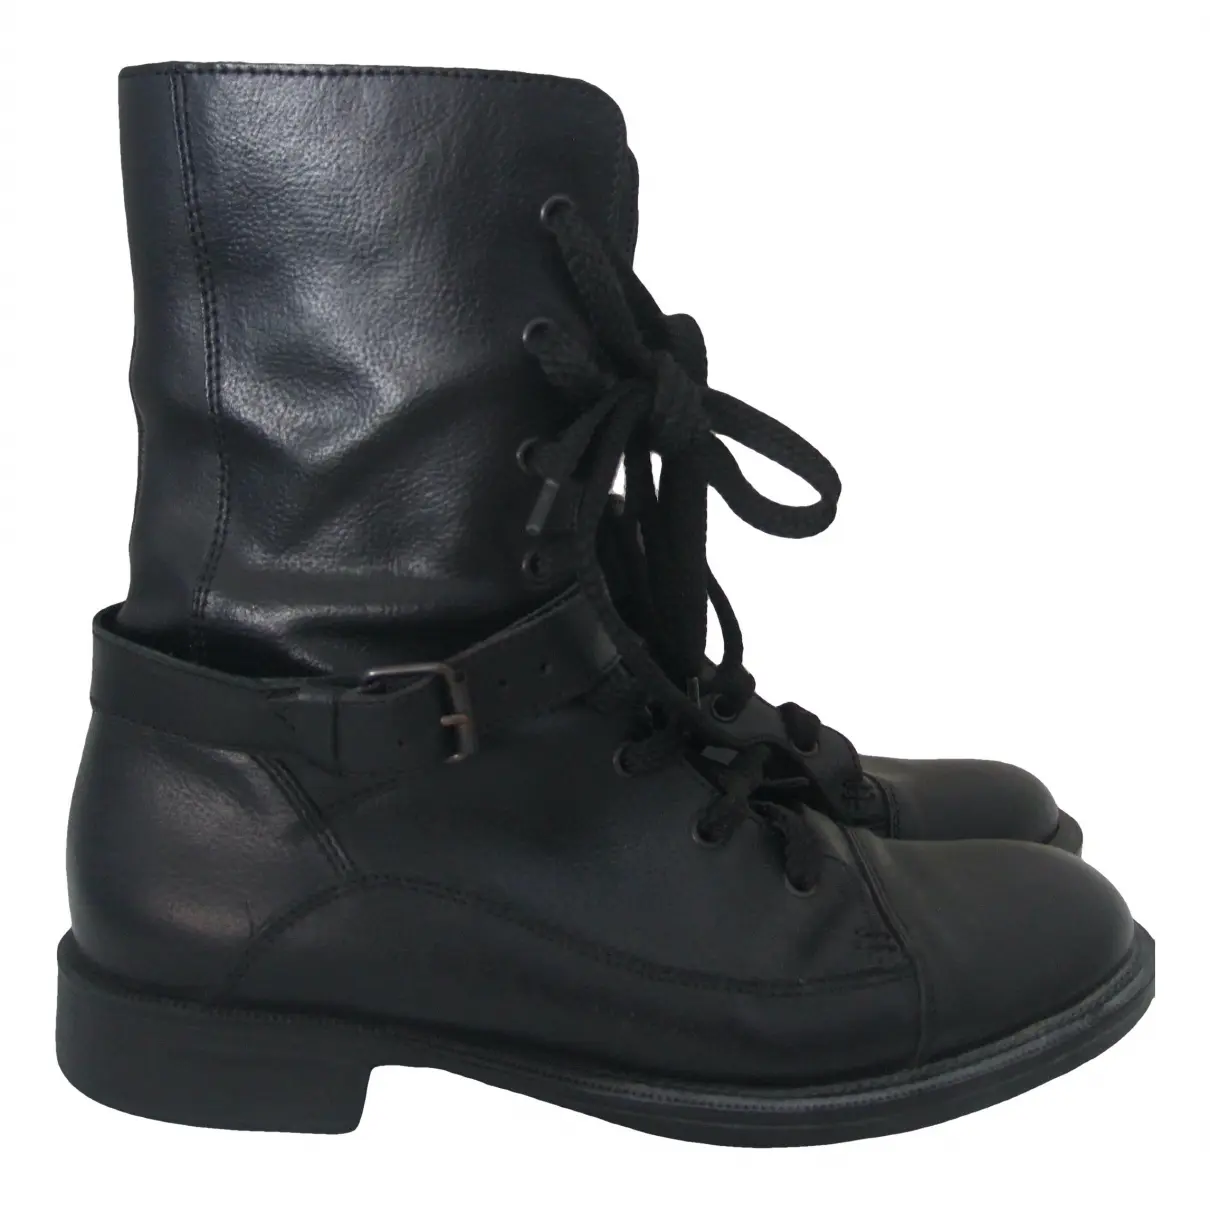 Leather biker boots